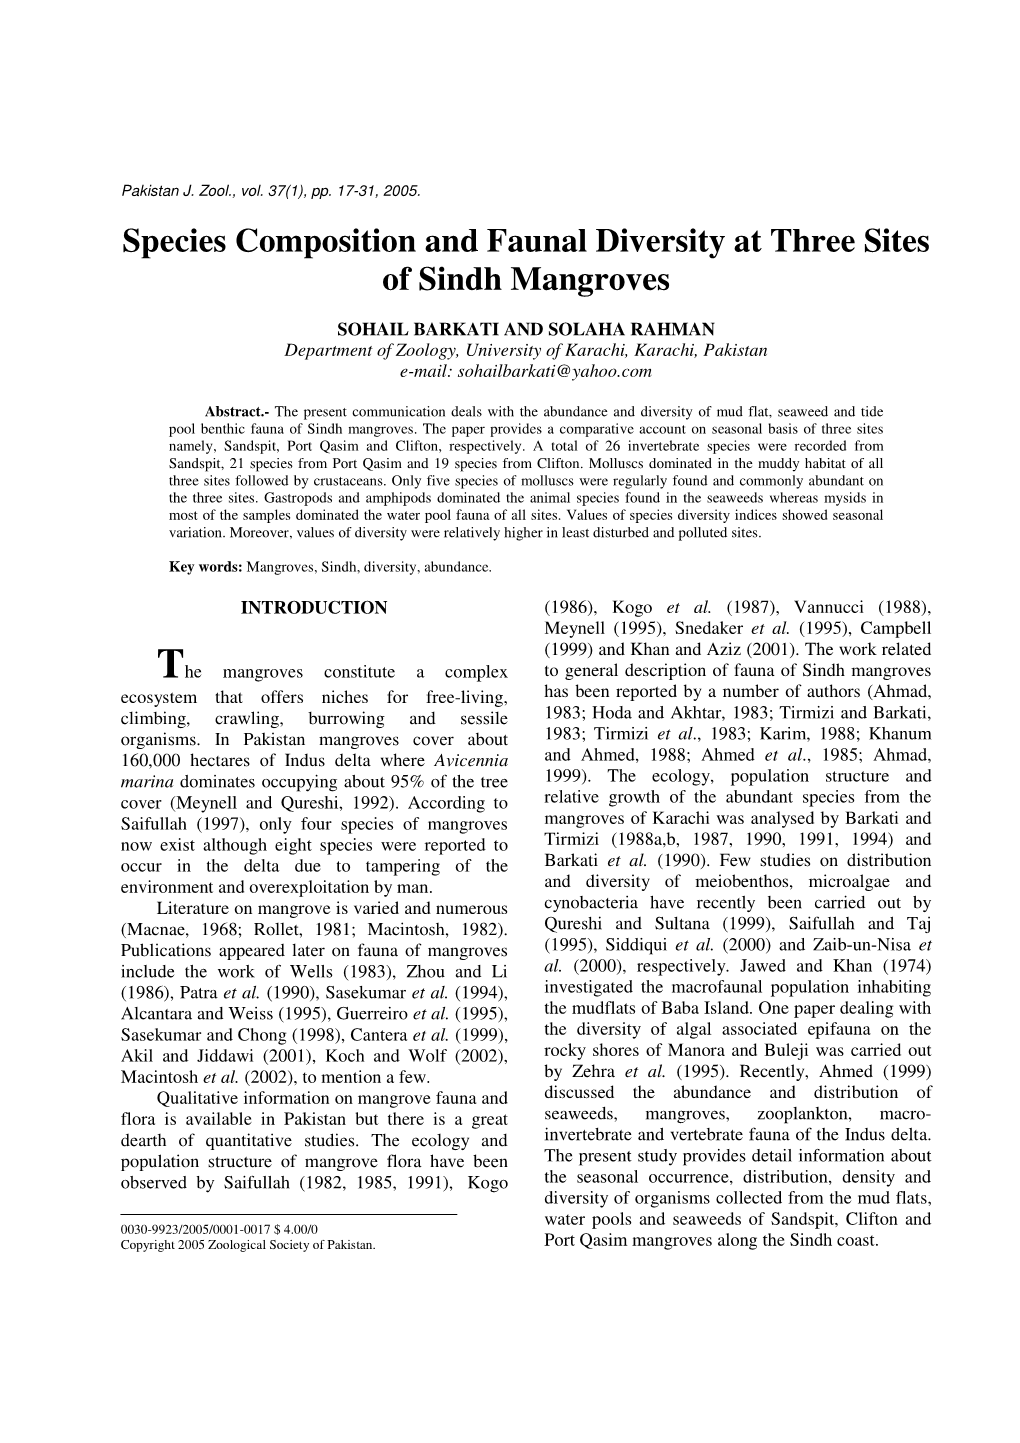 Species Composition and Faunal Diversity at Three Sites of Sindh Mangroves